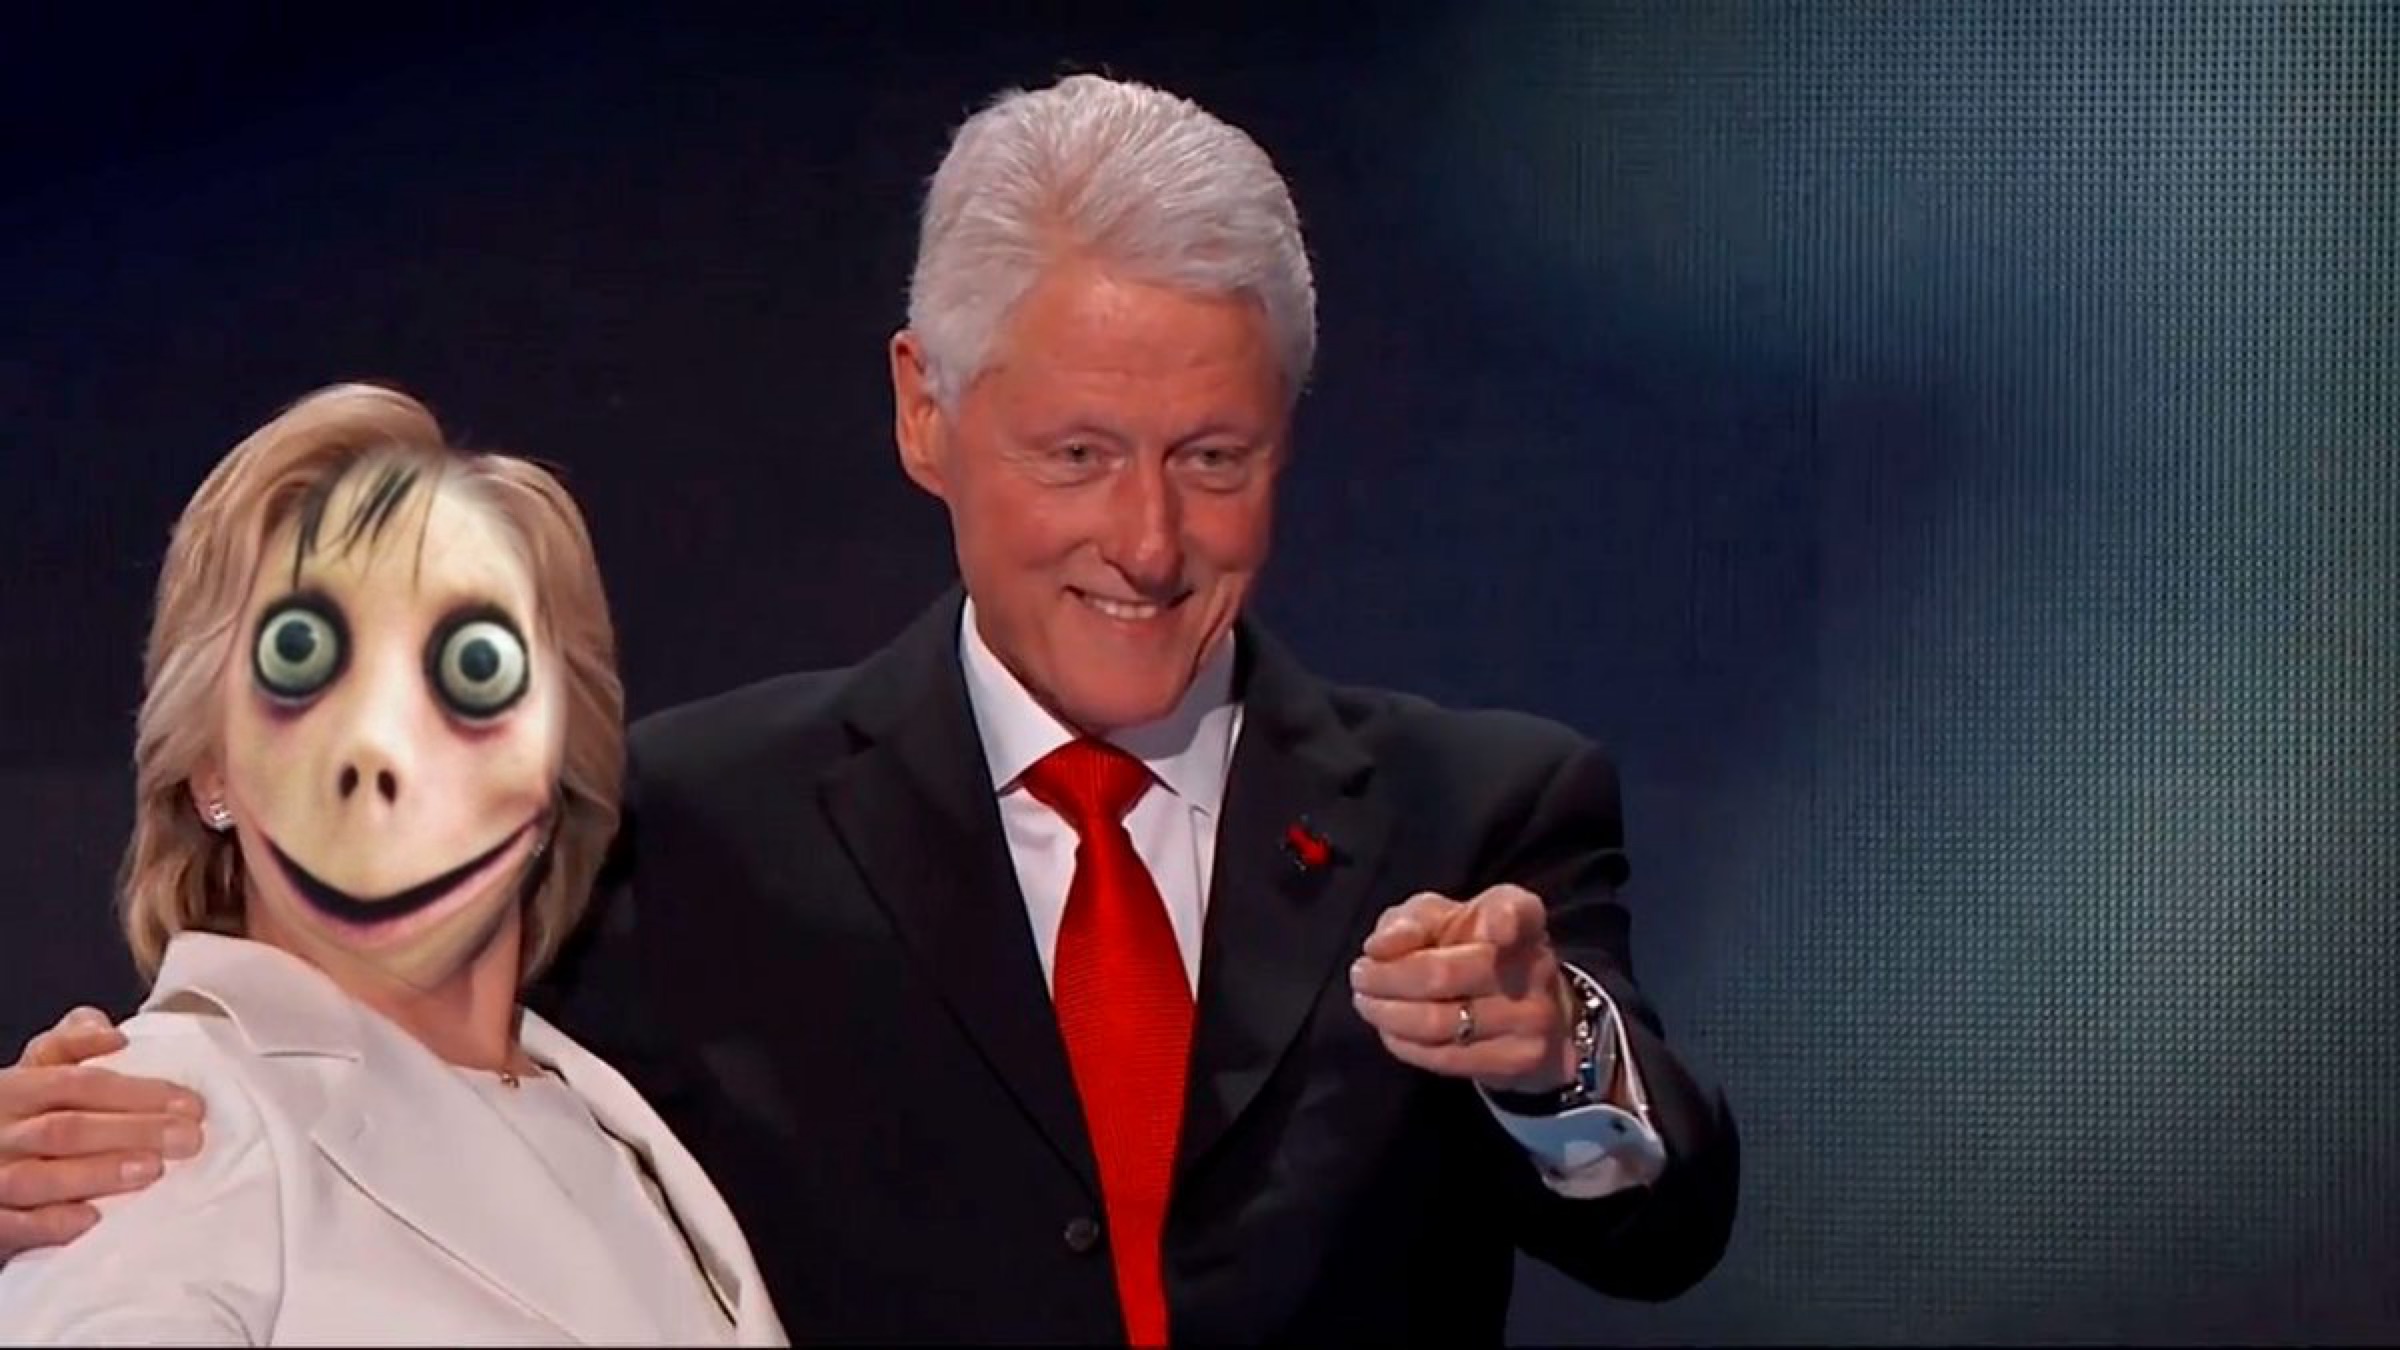 Slick Willie and his date